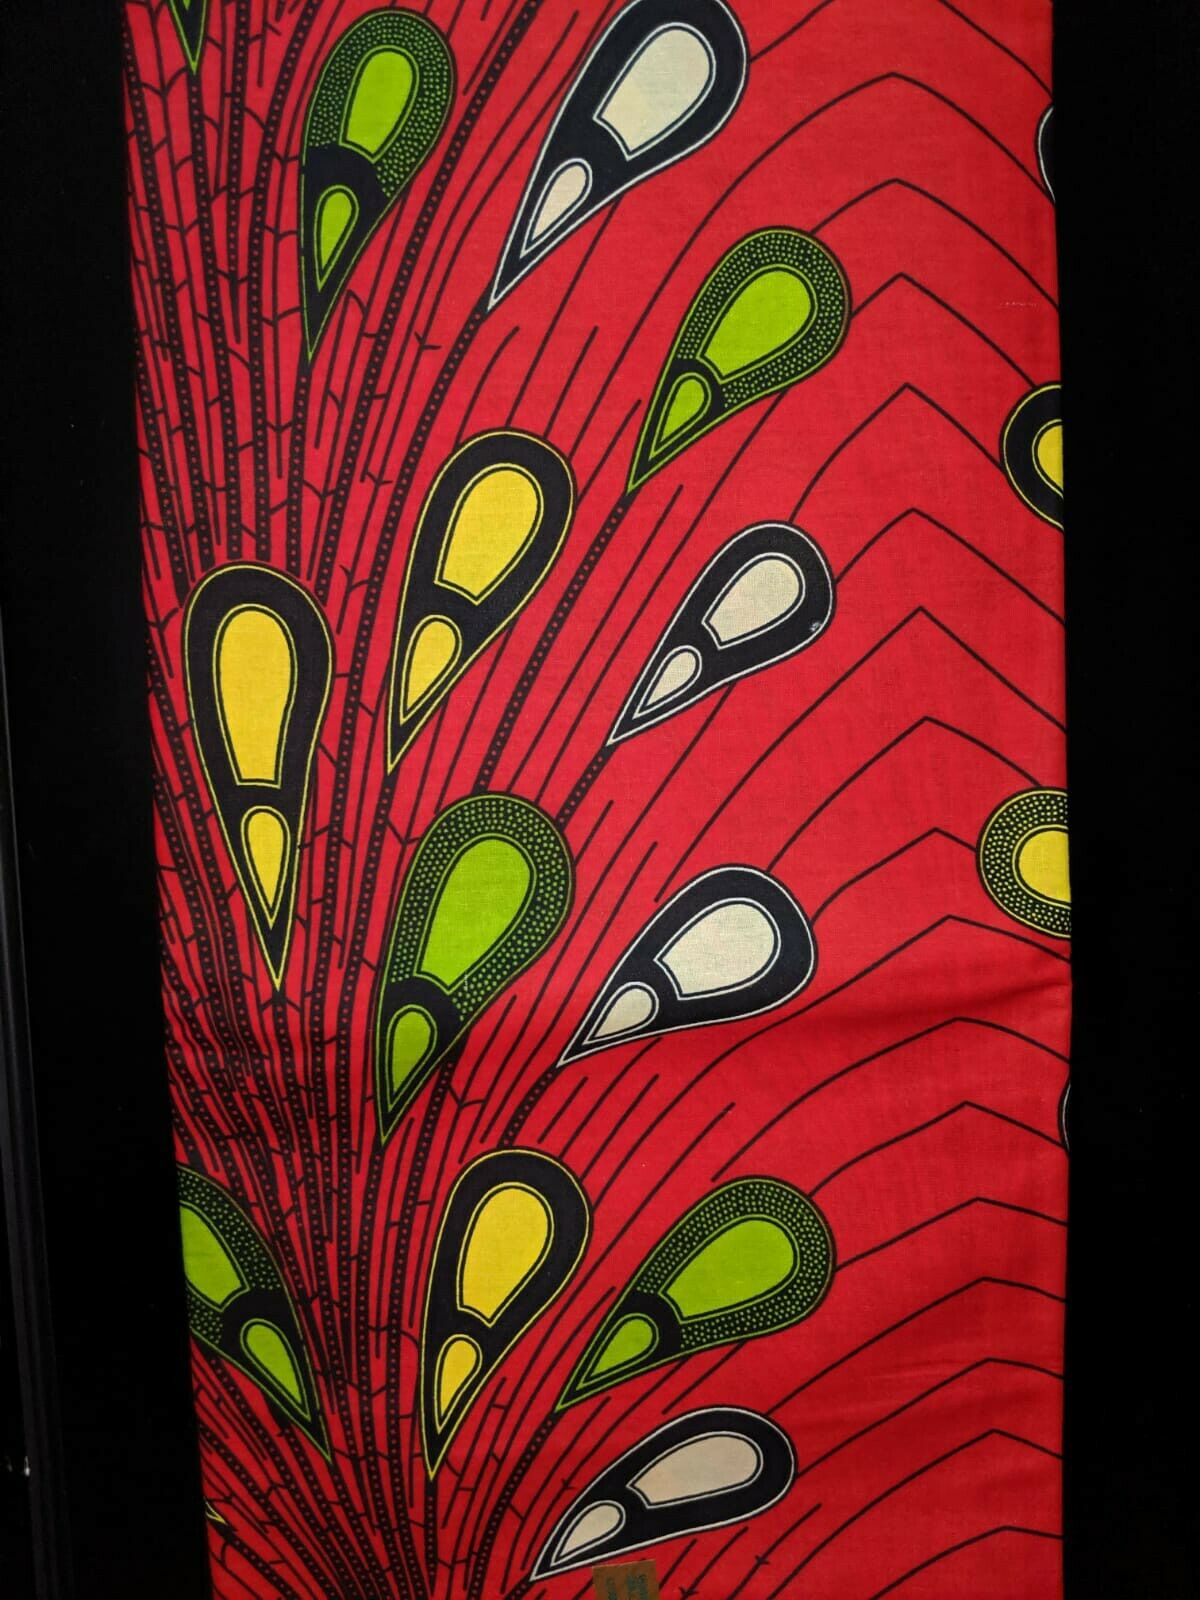 MULTICOLOR African Wax Print 100% Cotton Fabric (44 in.) 3yrds $15.75